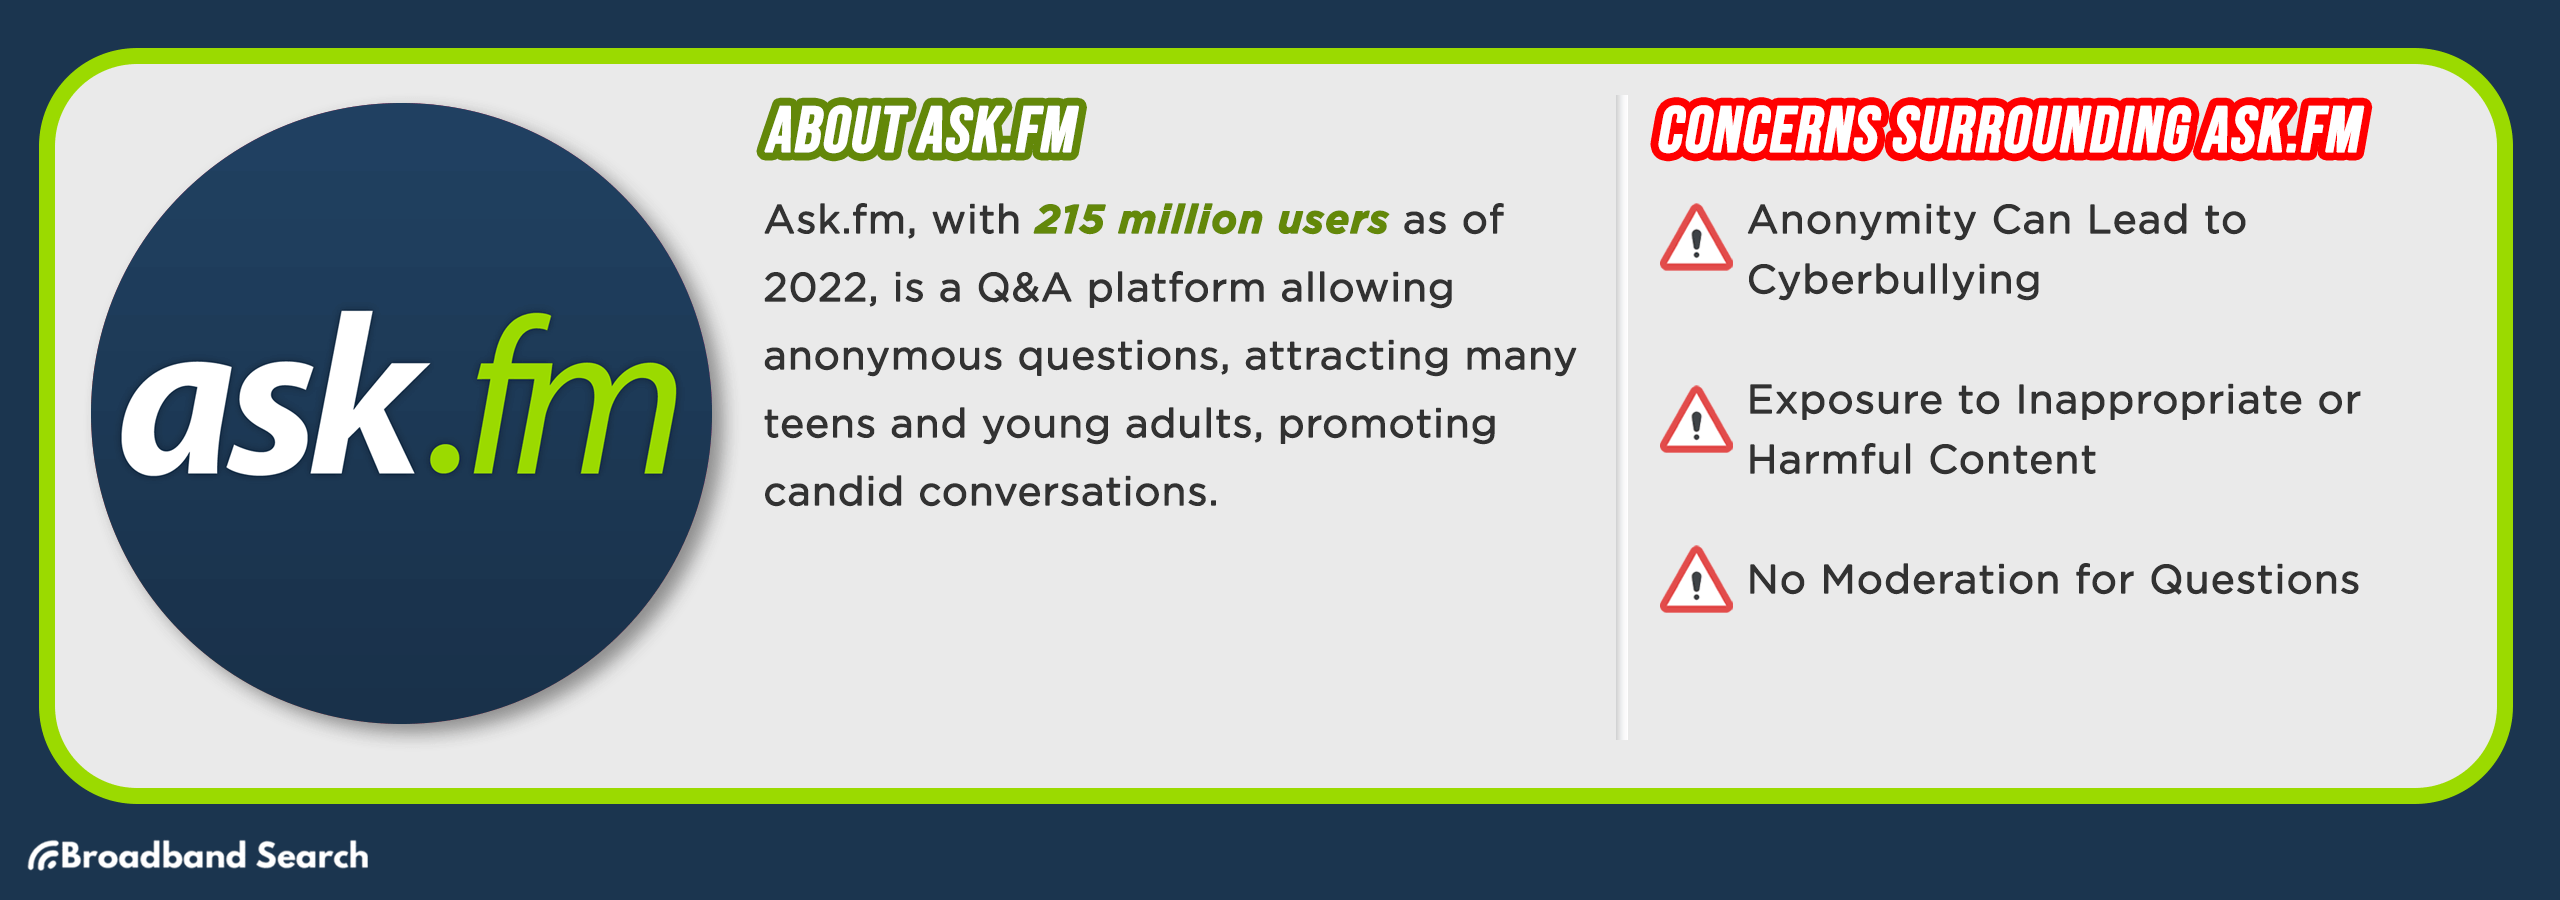 Statistics on Ask.fm and concerns surrounding usage of the social media site